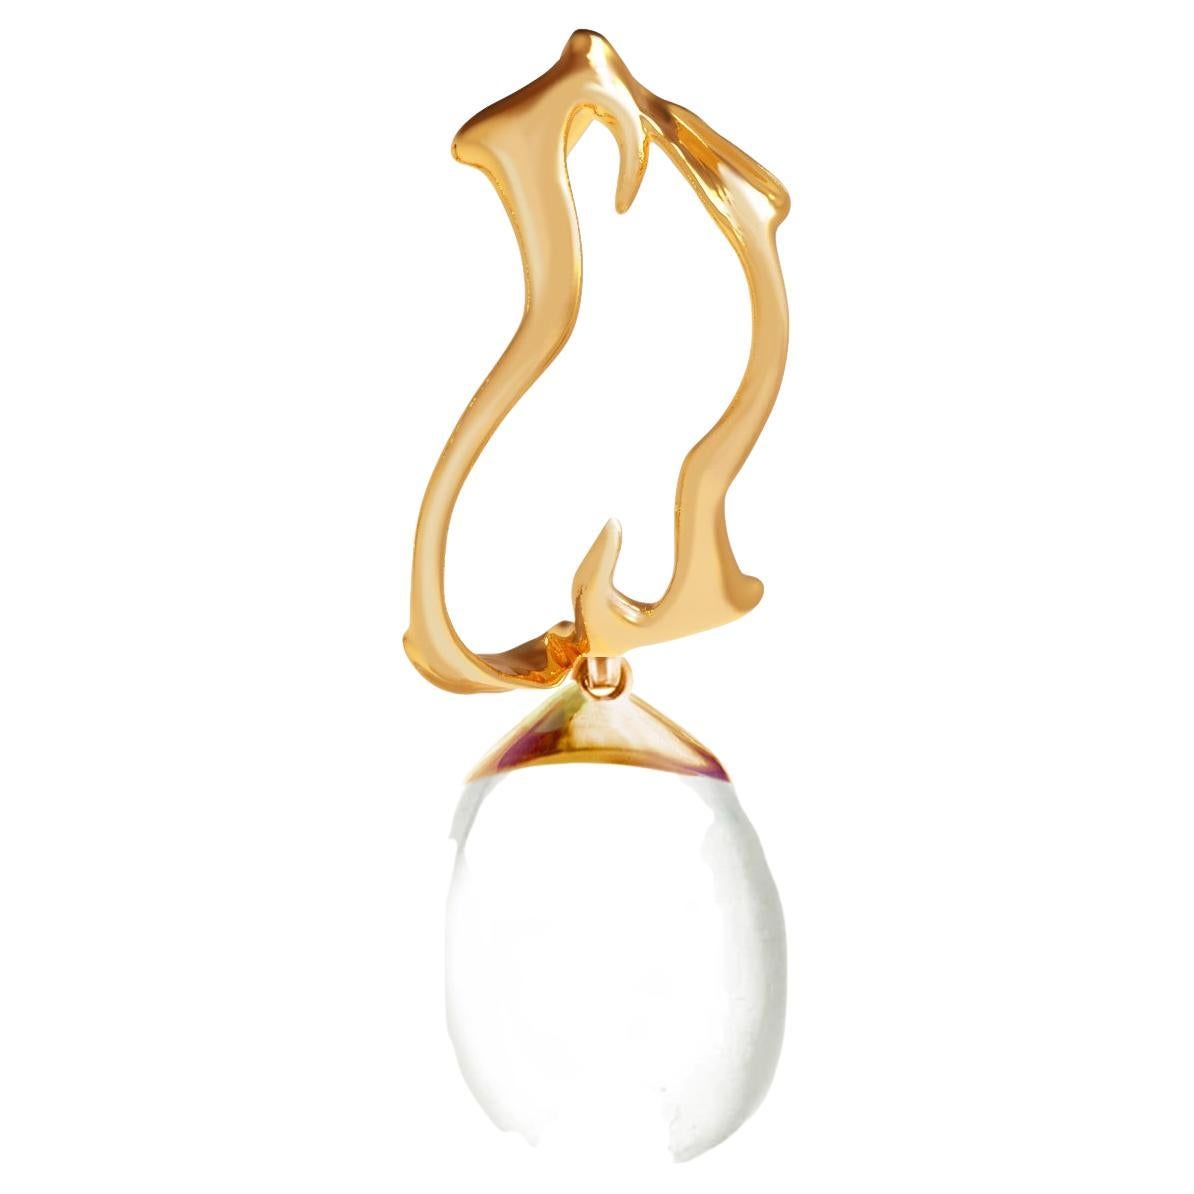 This contemporary drop pendant necklace is made of 18 karat yellow gold with detachable quartz drop. The highest quality gold has liquid sparkling surface as the perfect jewellery highlight. The work is made by the fine jewellery standards of